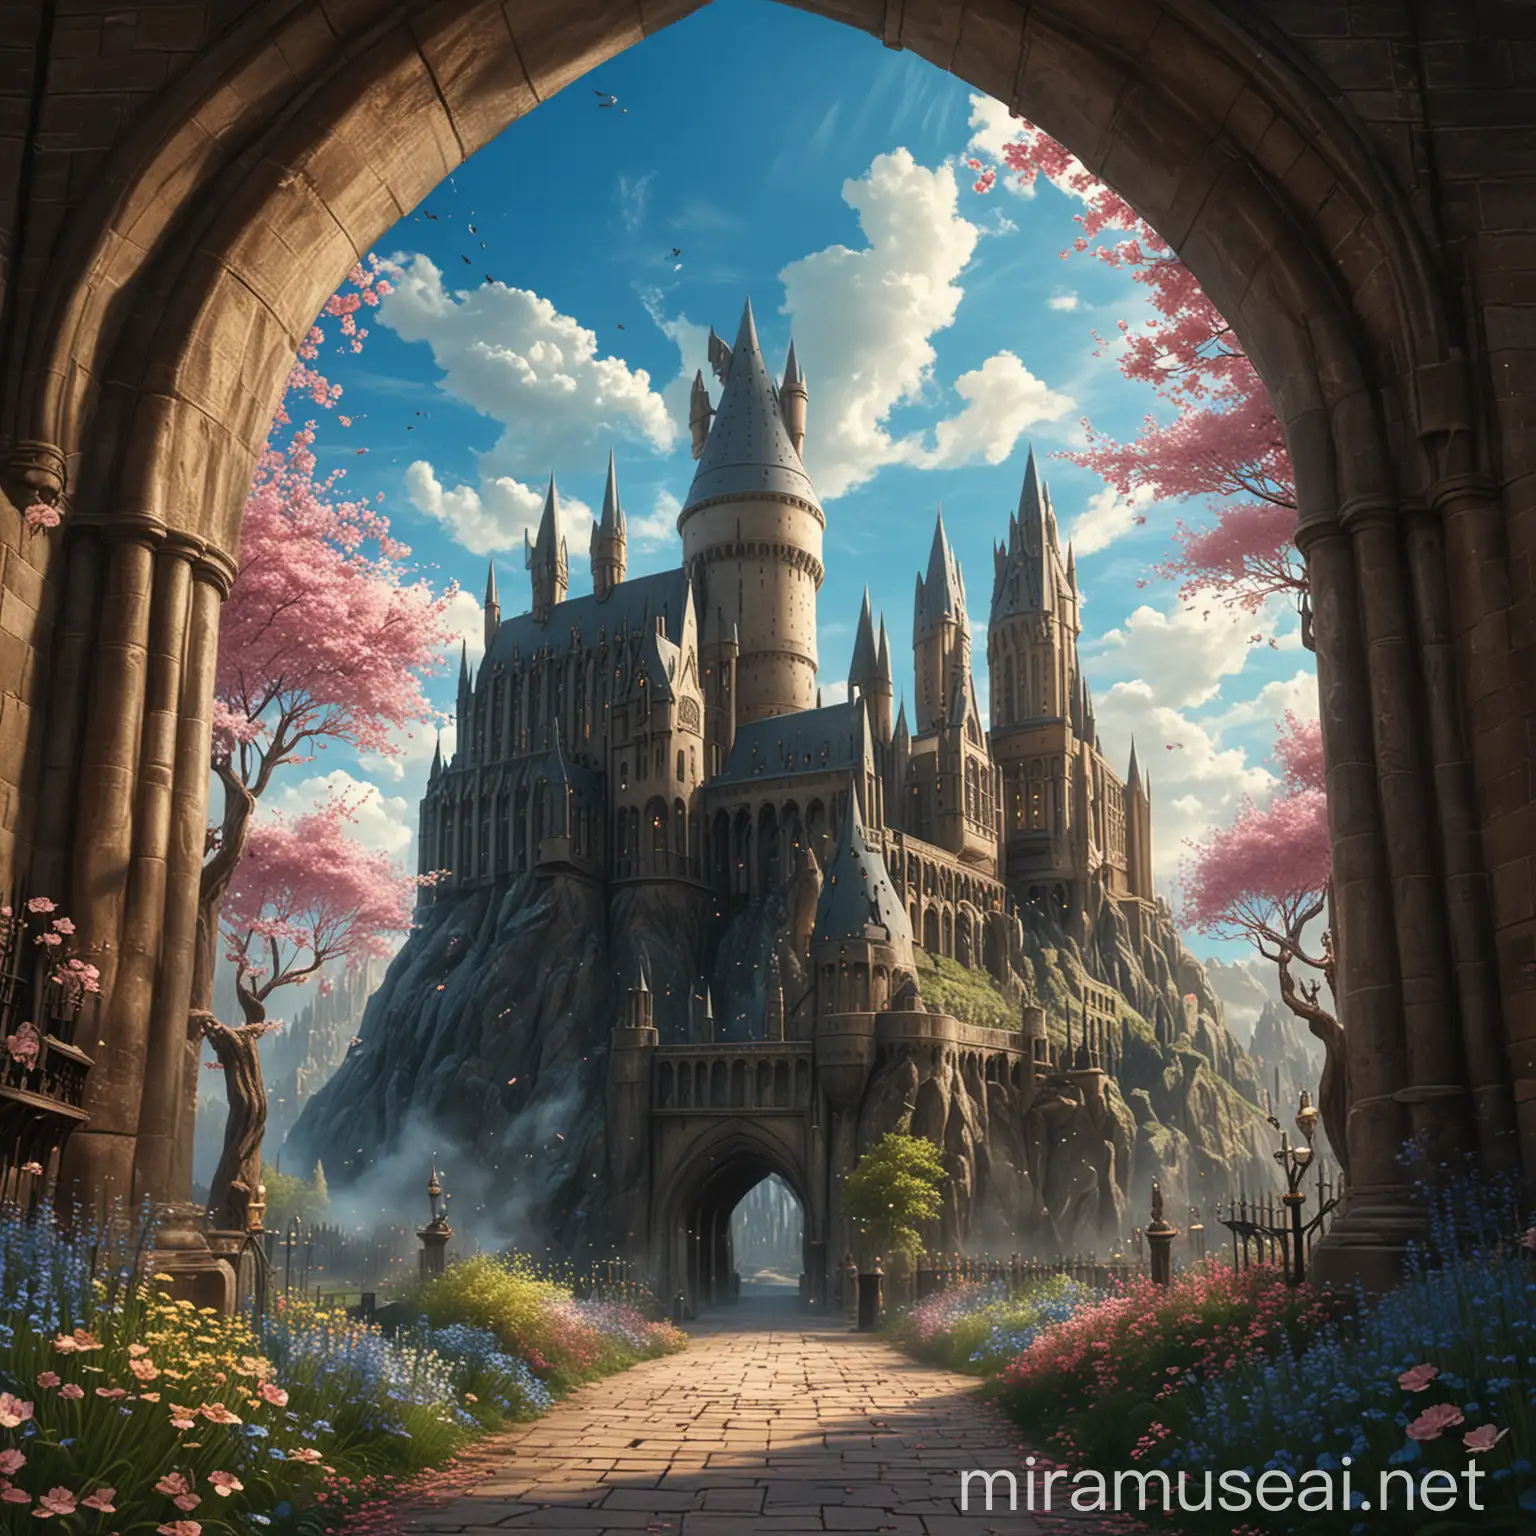 Hogwarts Castle Under a Blue Sky with Blossoming Trees